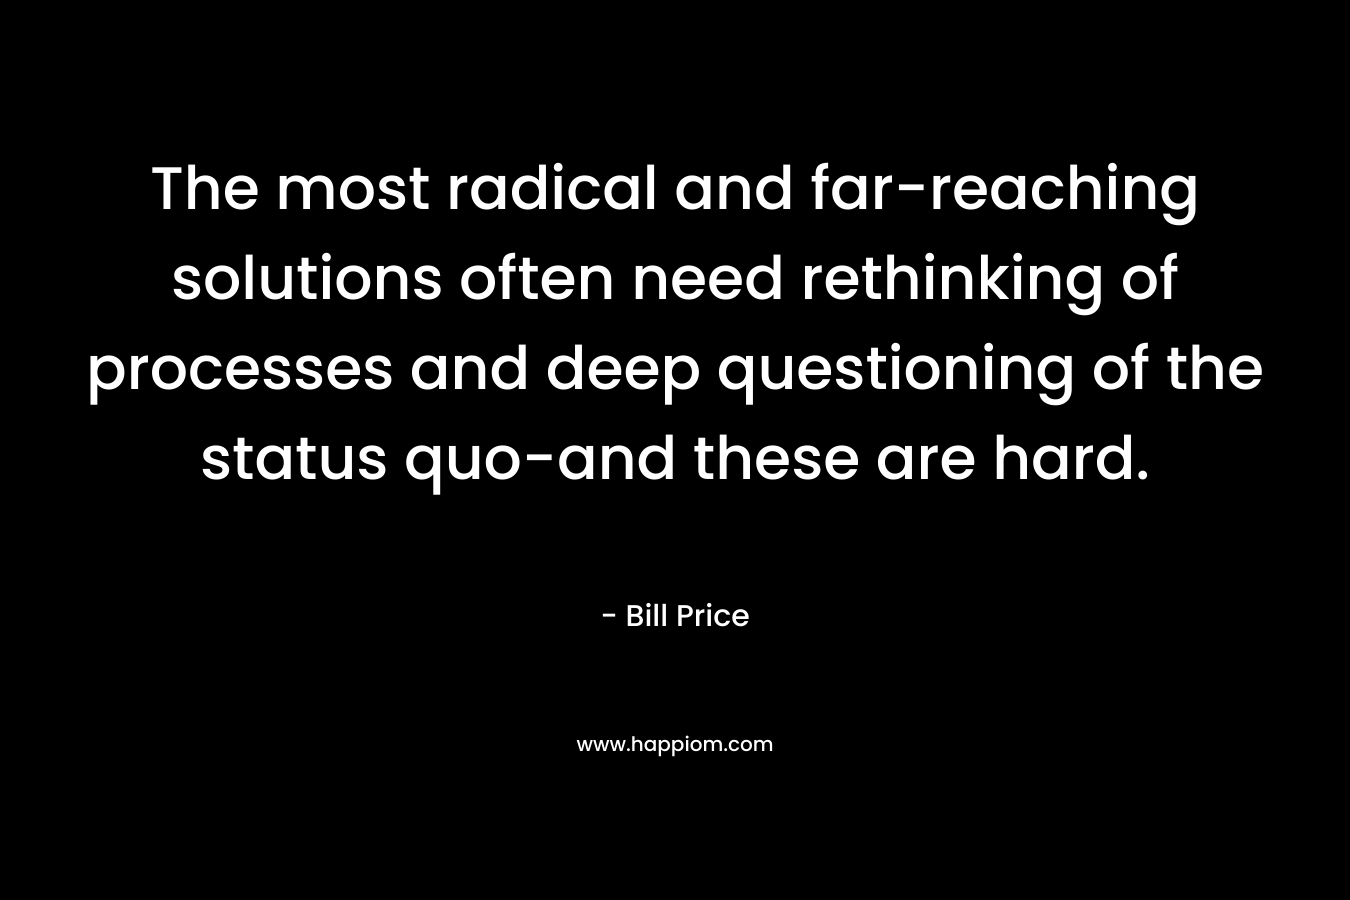 The most radical and far-reaching solutions often need rethinking of processes and deep questioning of the status quo-and these are hard.